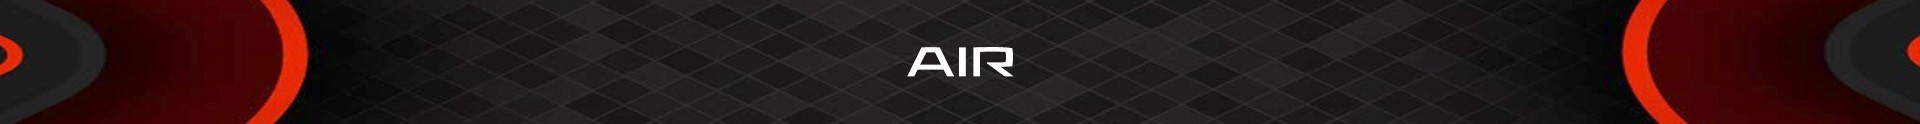 air category